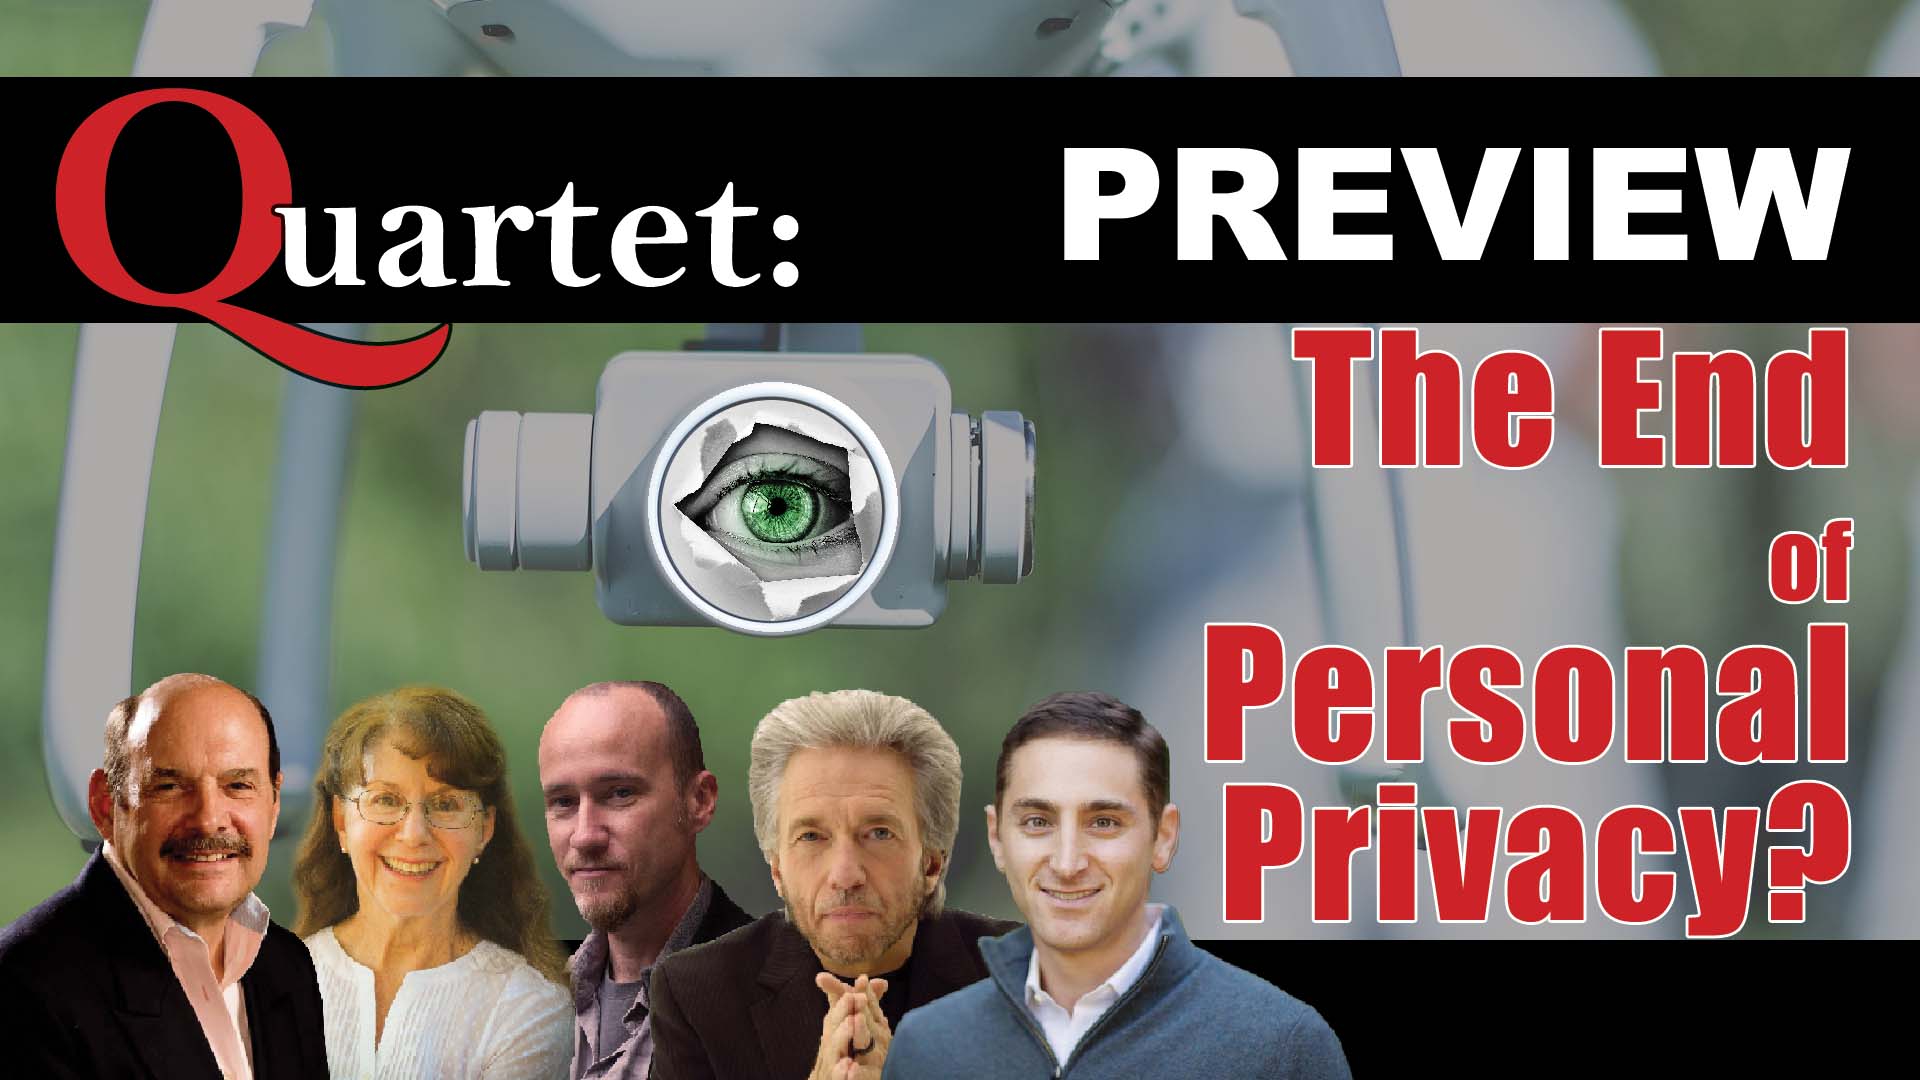 Quartet Preview - is this the end of personal privacy? with Gregg Braden, Penny Kelly, John Petersen, Kingsley Dennis